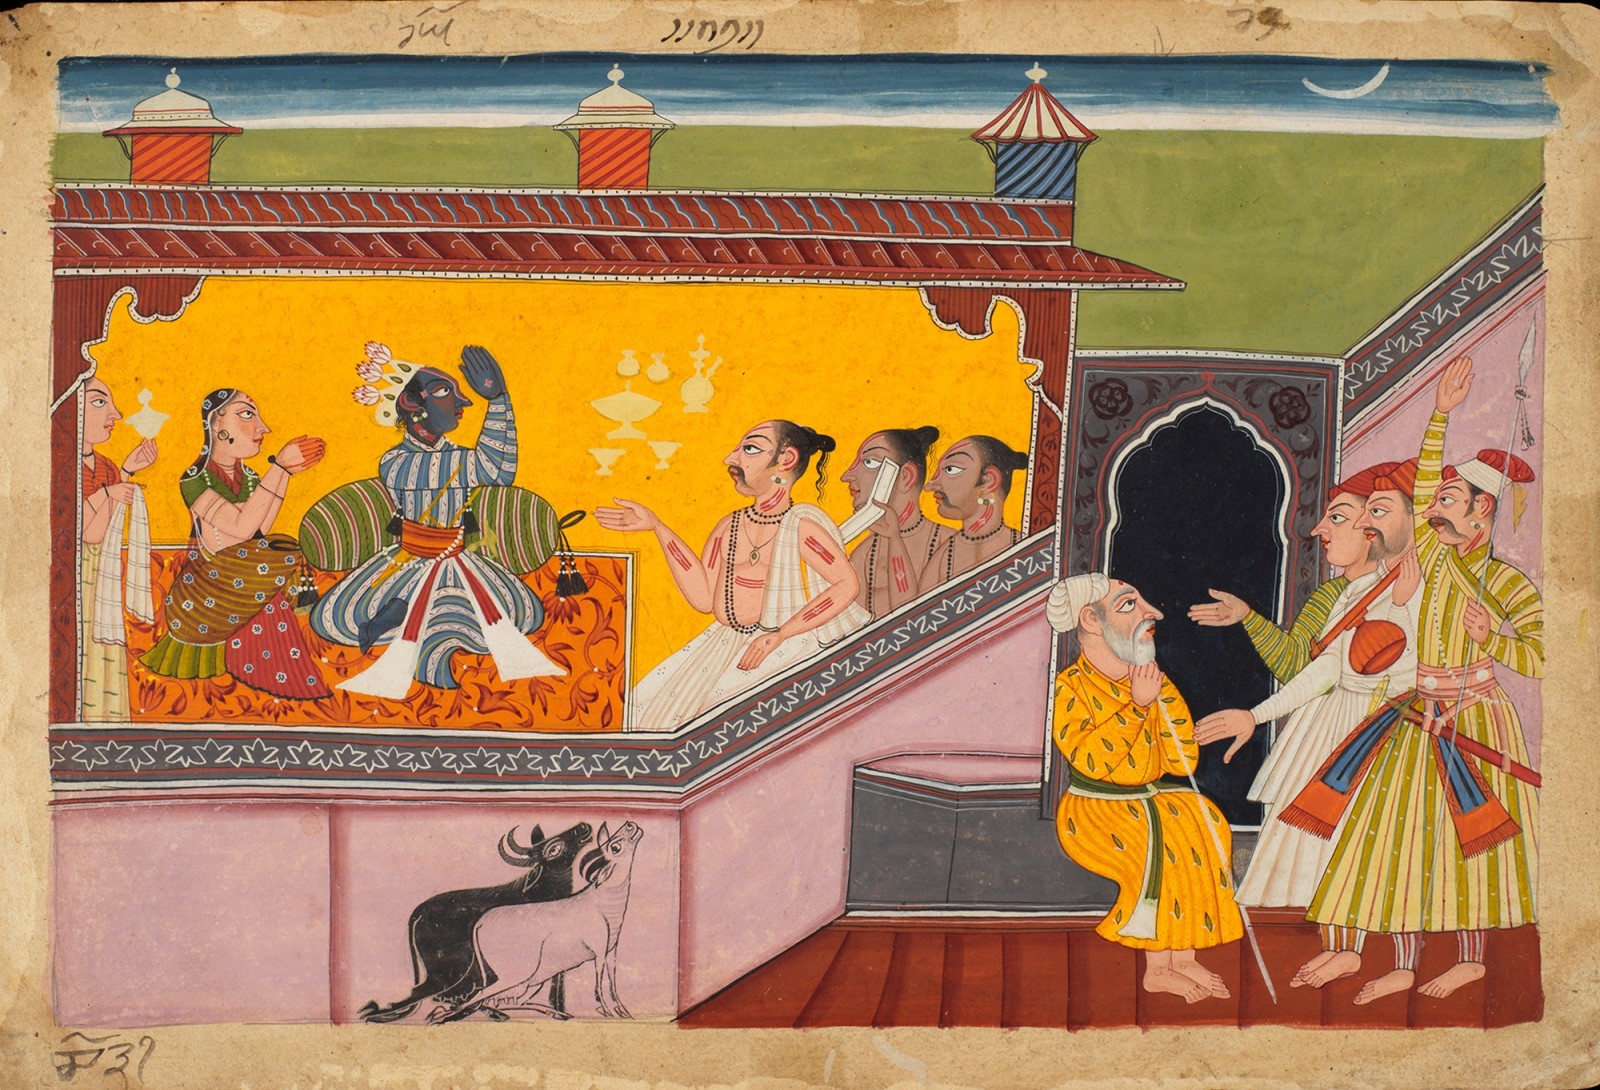 The sage Vasishtha instructs Rama and Sita to fast prior to his installation as King: Folio from the Ramayana, By the Master of Style II of the Shangri Ramayana, Bahu (Jammu) or Kulu, c.1690-1710